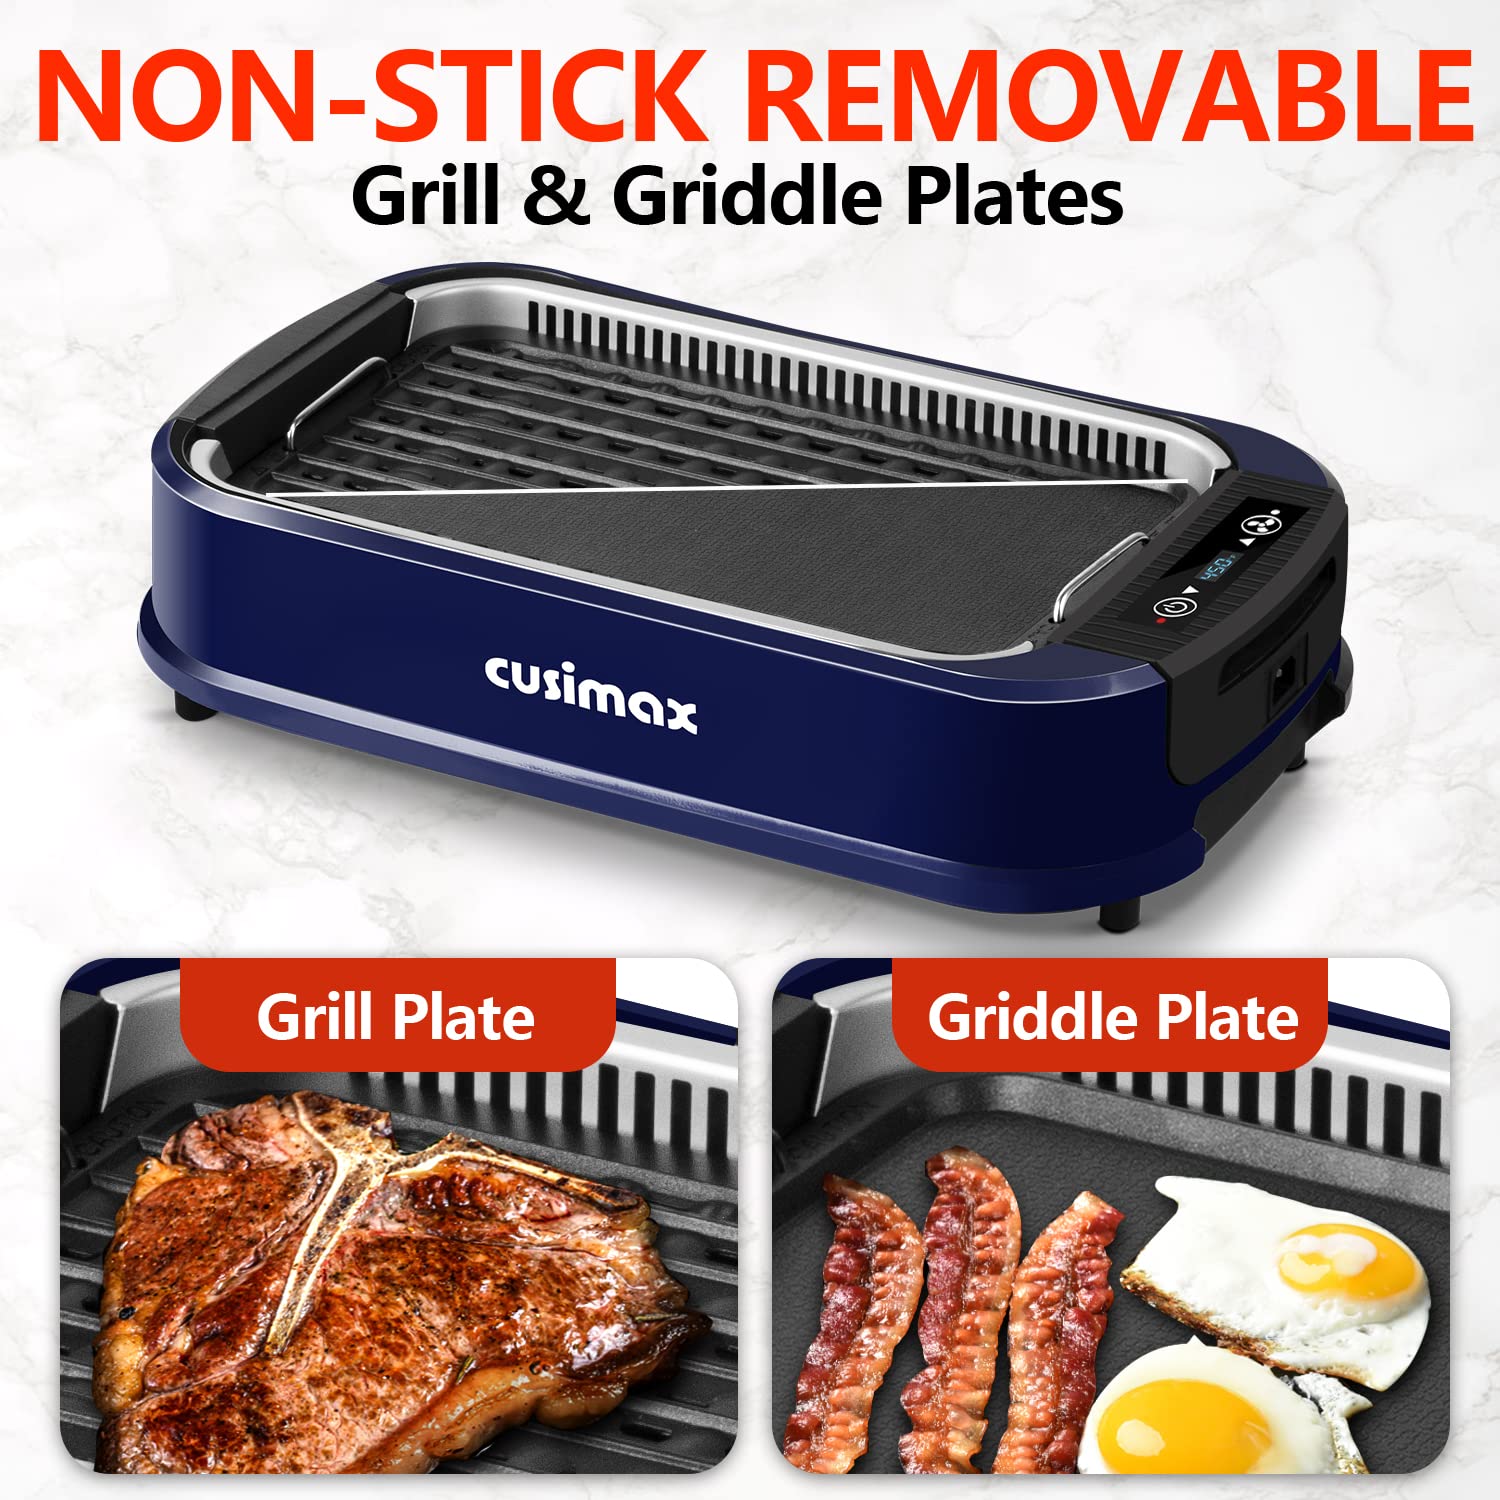 Indoor Grill Electric Grill CUSIMAX Smokeless Grill Portable Korean BBQ  Grill with Turbo Smoke Extractor Technology, Non-stick Removable Grill  Plate